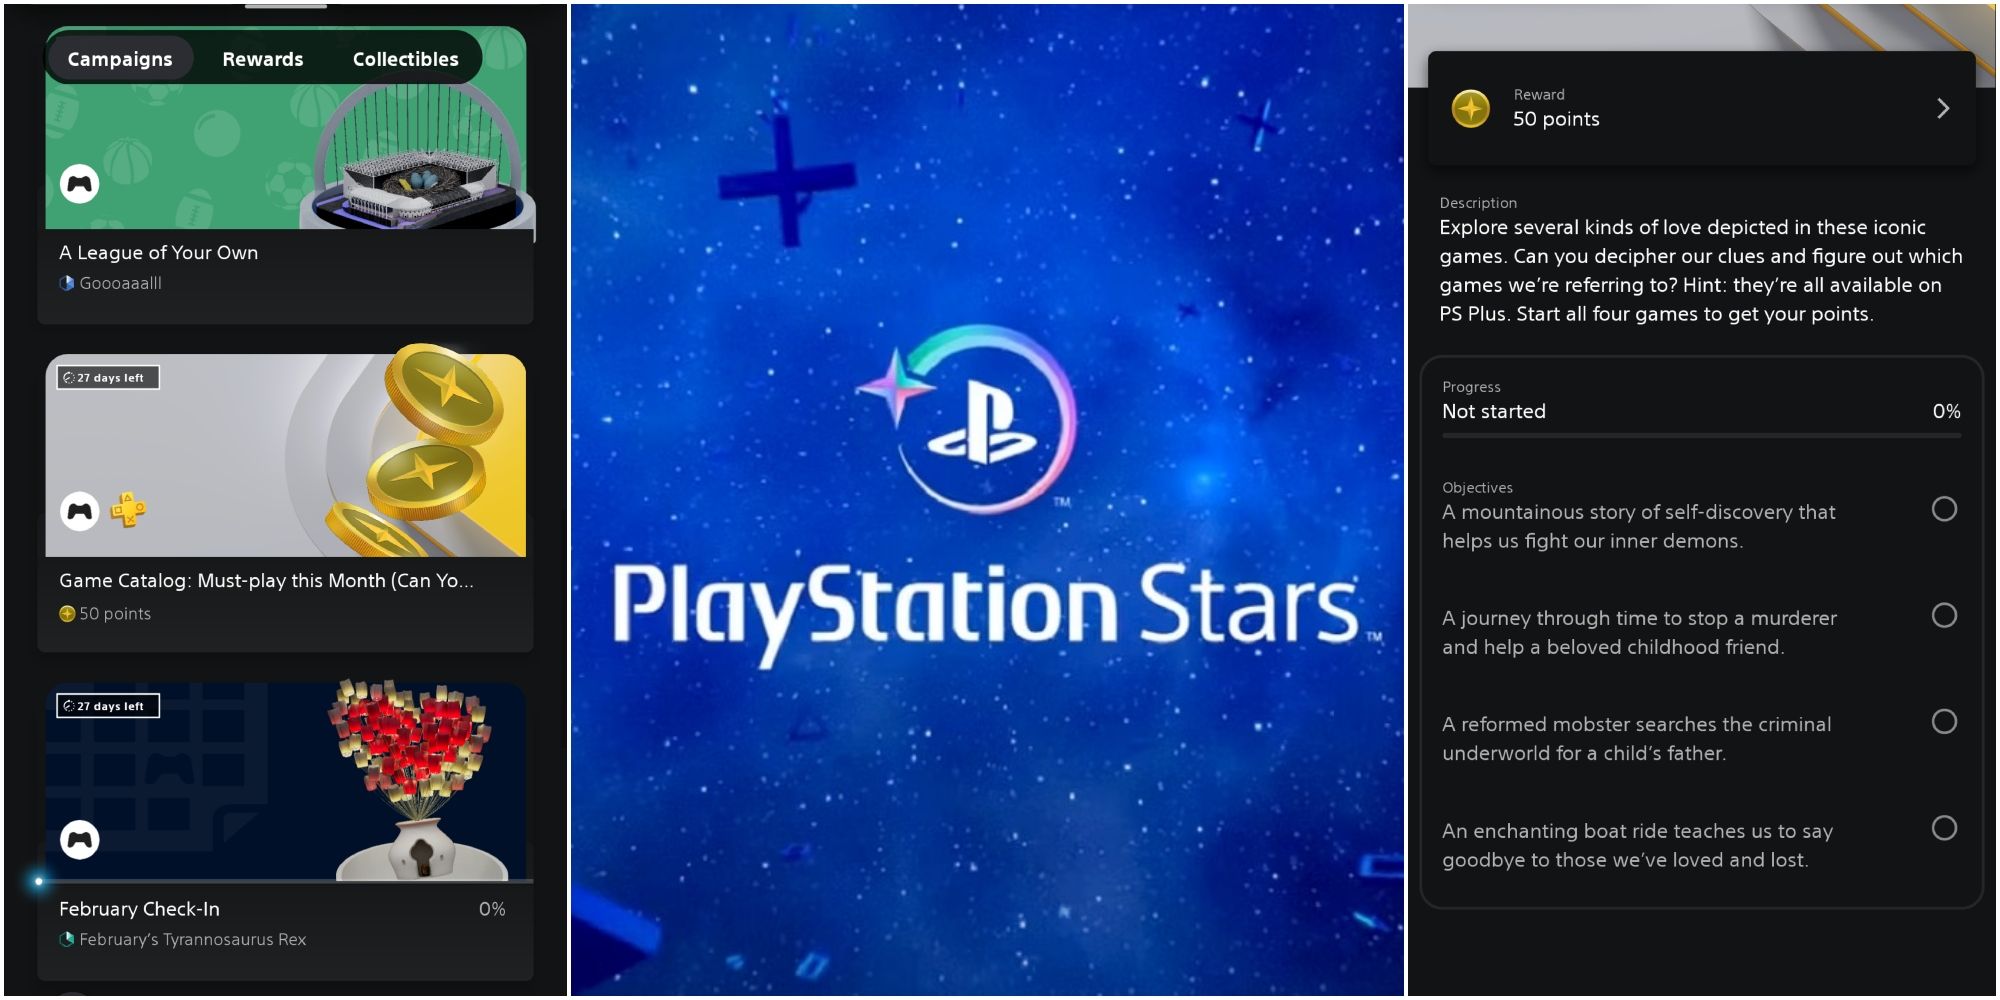 This was a pleasant surprise! #playstation #playstationstars #ps4 #ps5, Playstation